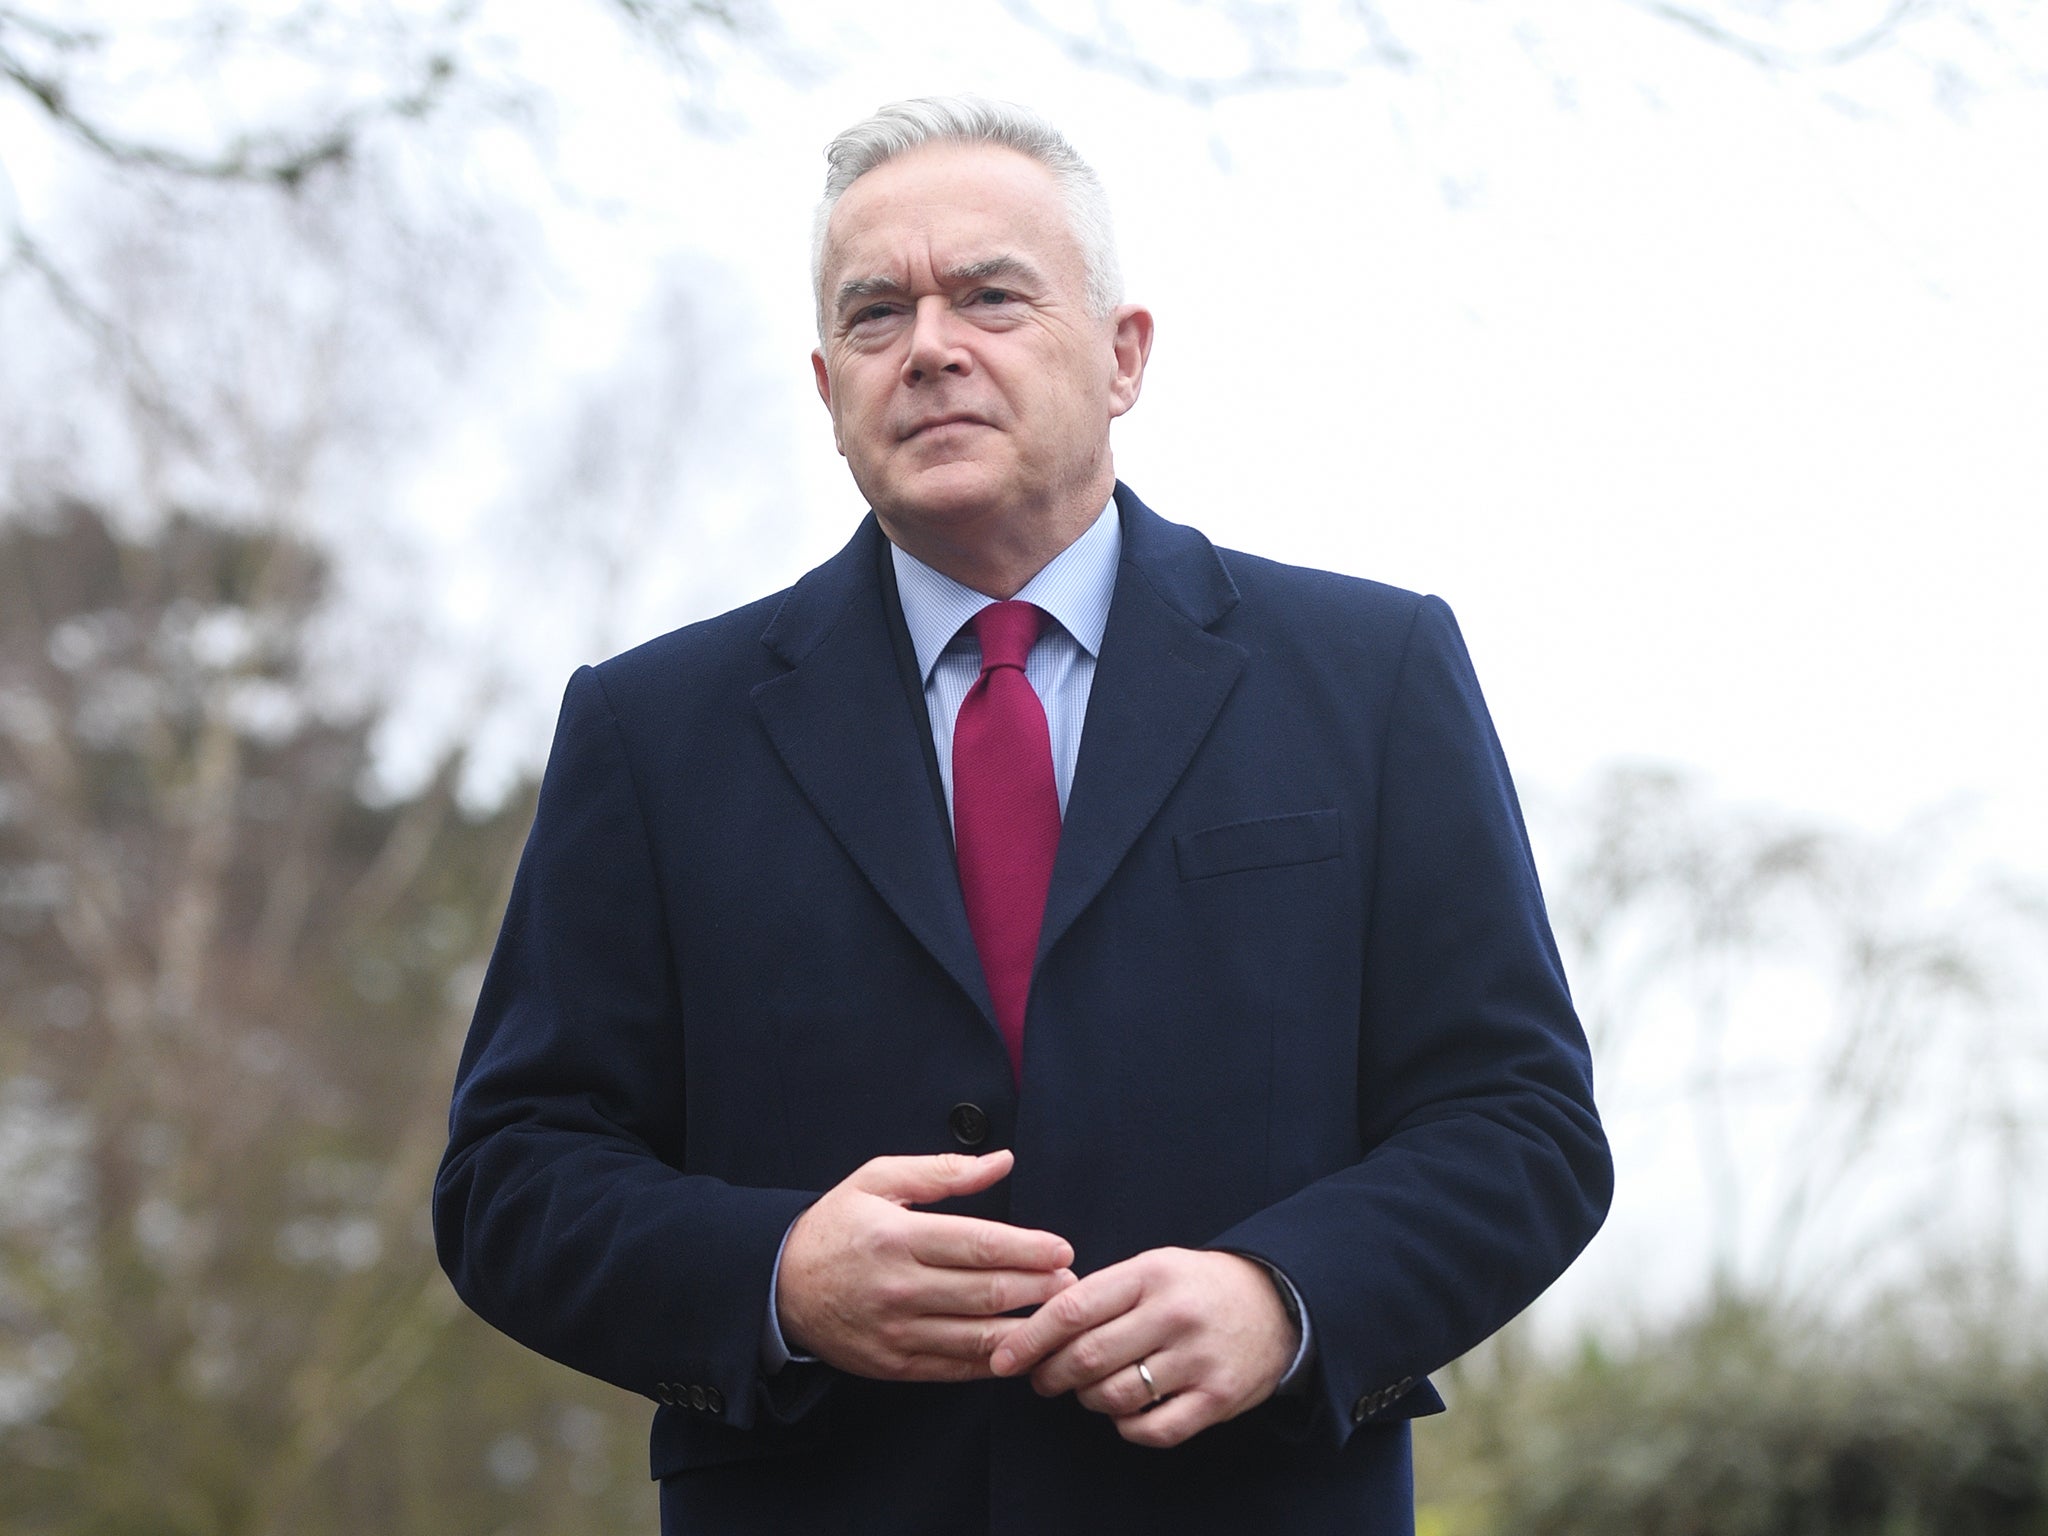 Huw Edwards BBC presenter who broke Queens death now at centre of sex scandal The Independent photo image